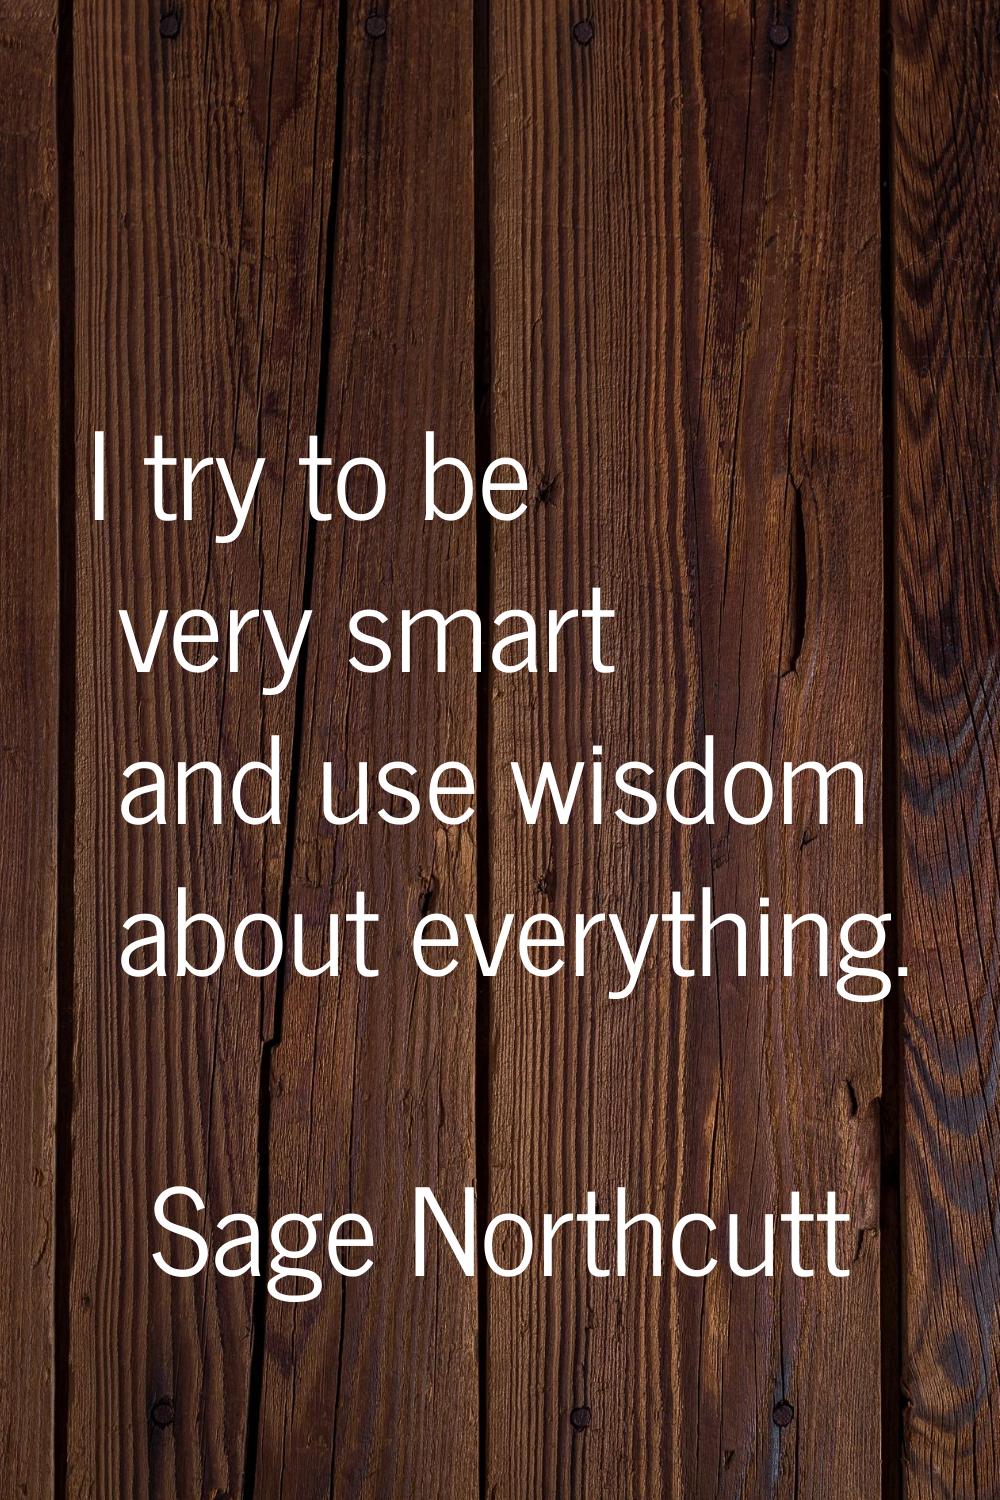 I try to be very smart and use wisdom about everything.